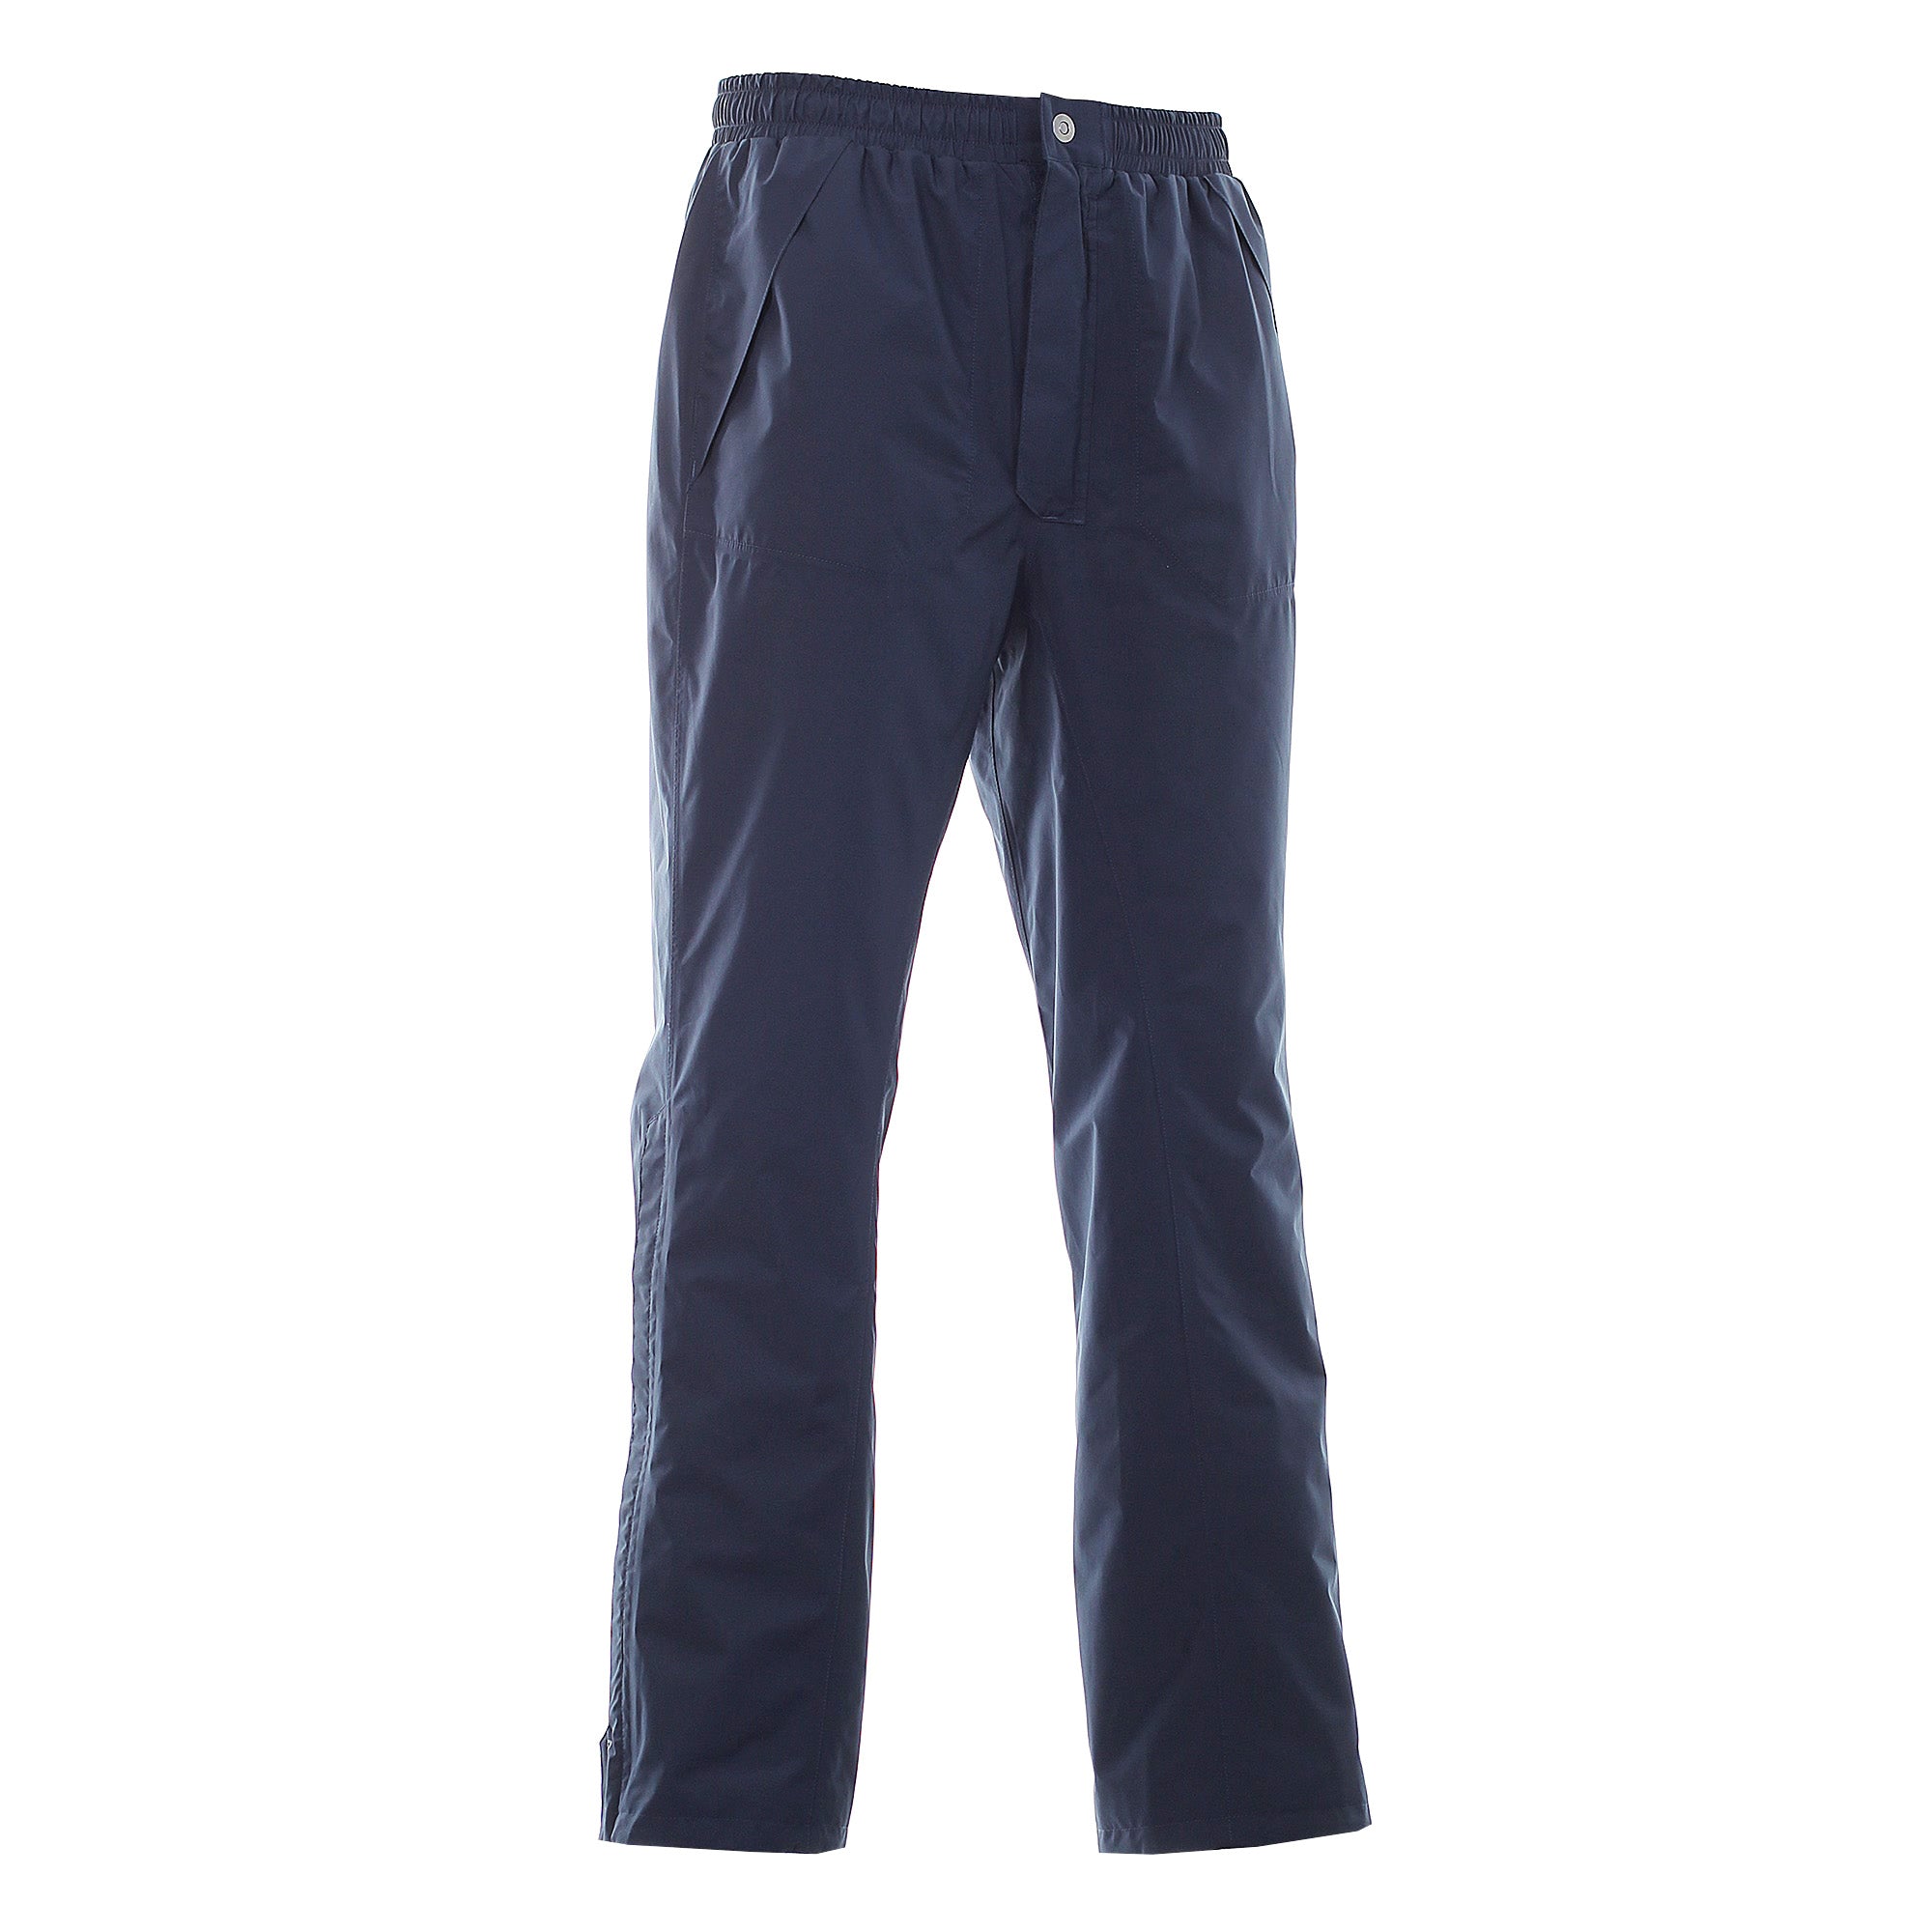 Valiente Carvico Artica stretch pants thermal in navy buy online - Golf  House